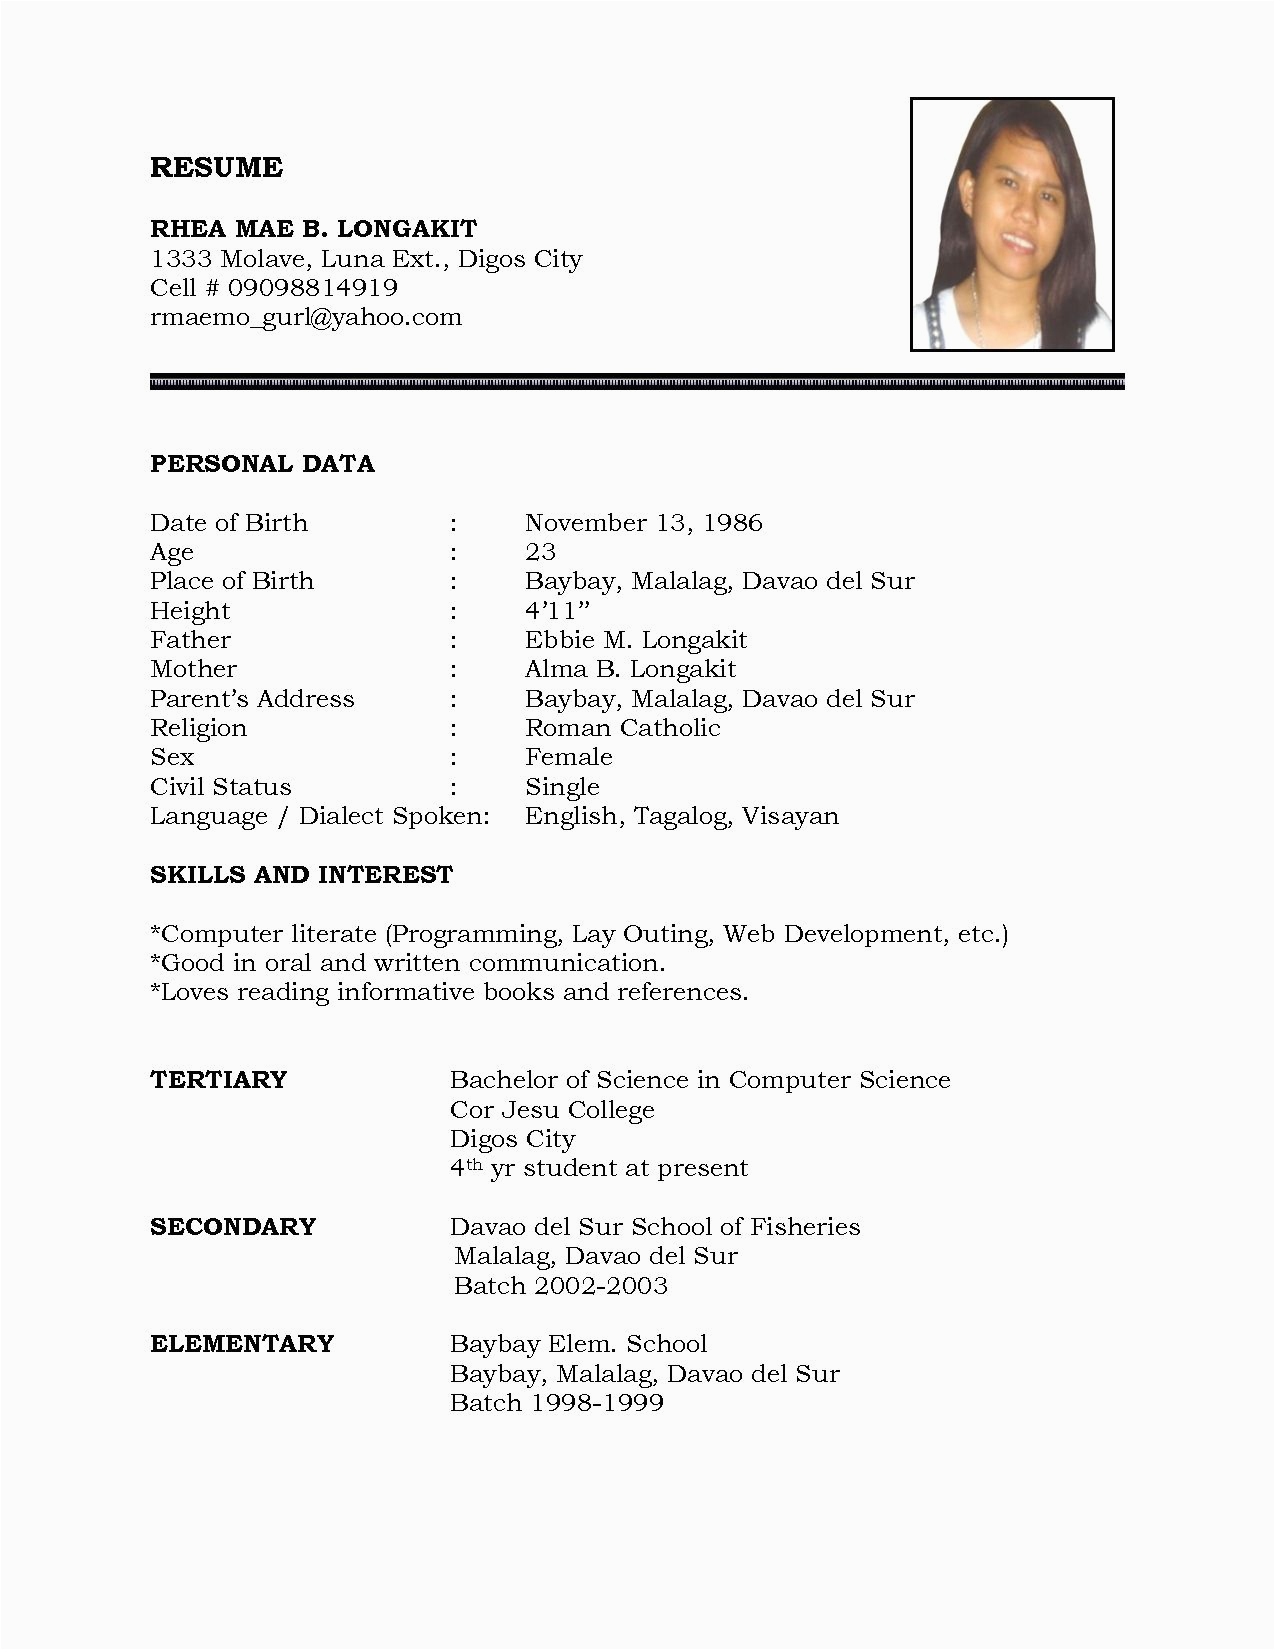 Simple Sample Email for Job Application with Resume Download Free Blank Resume form Template Printable Biodata